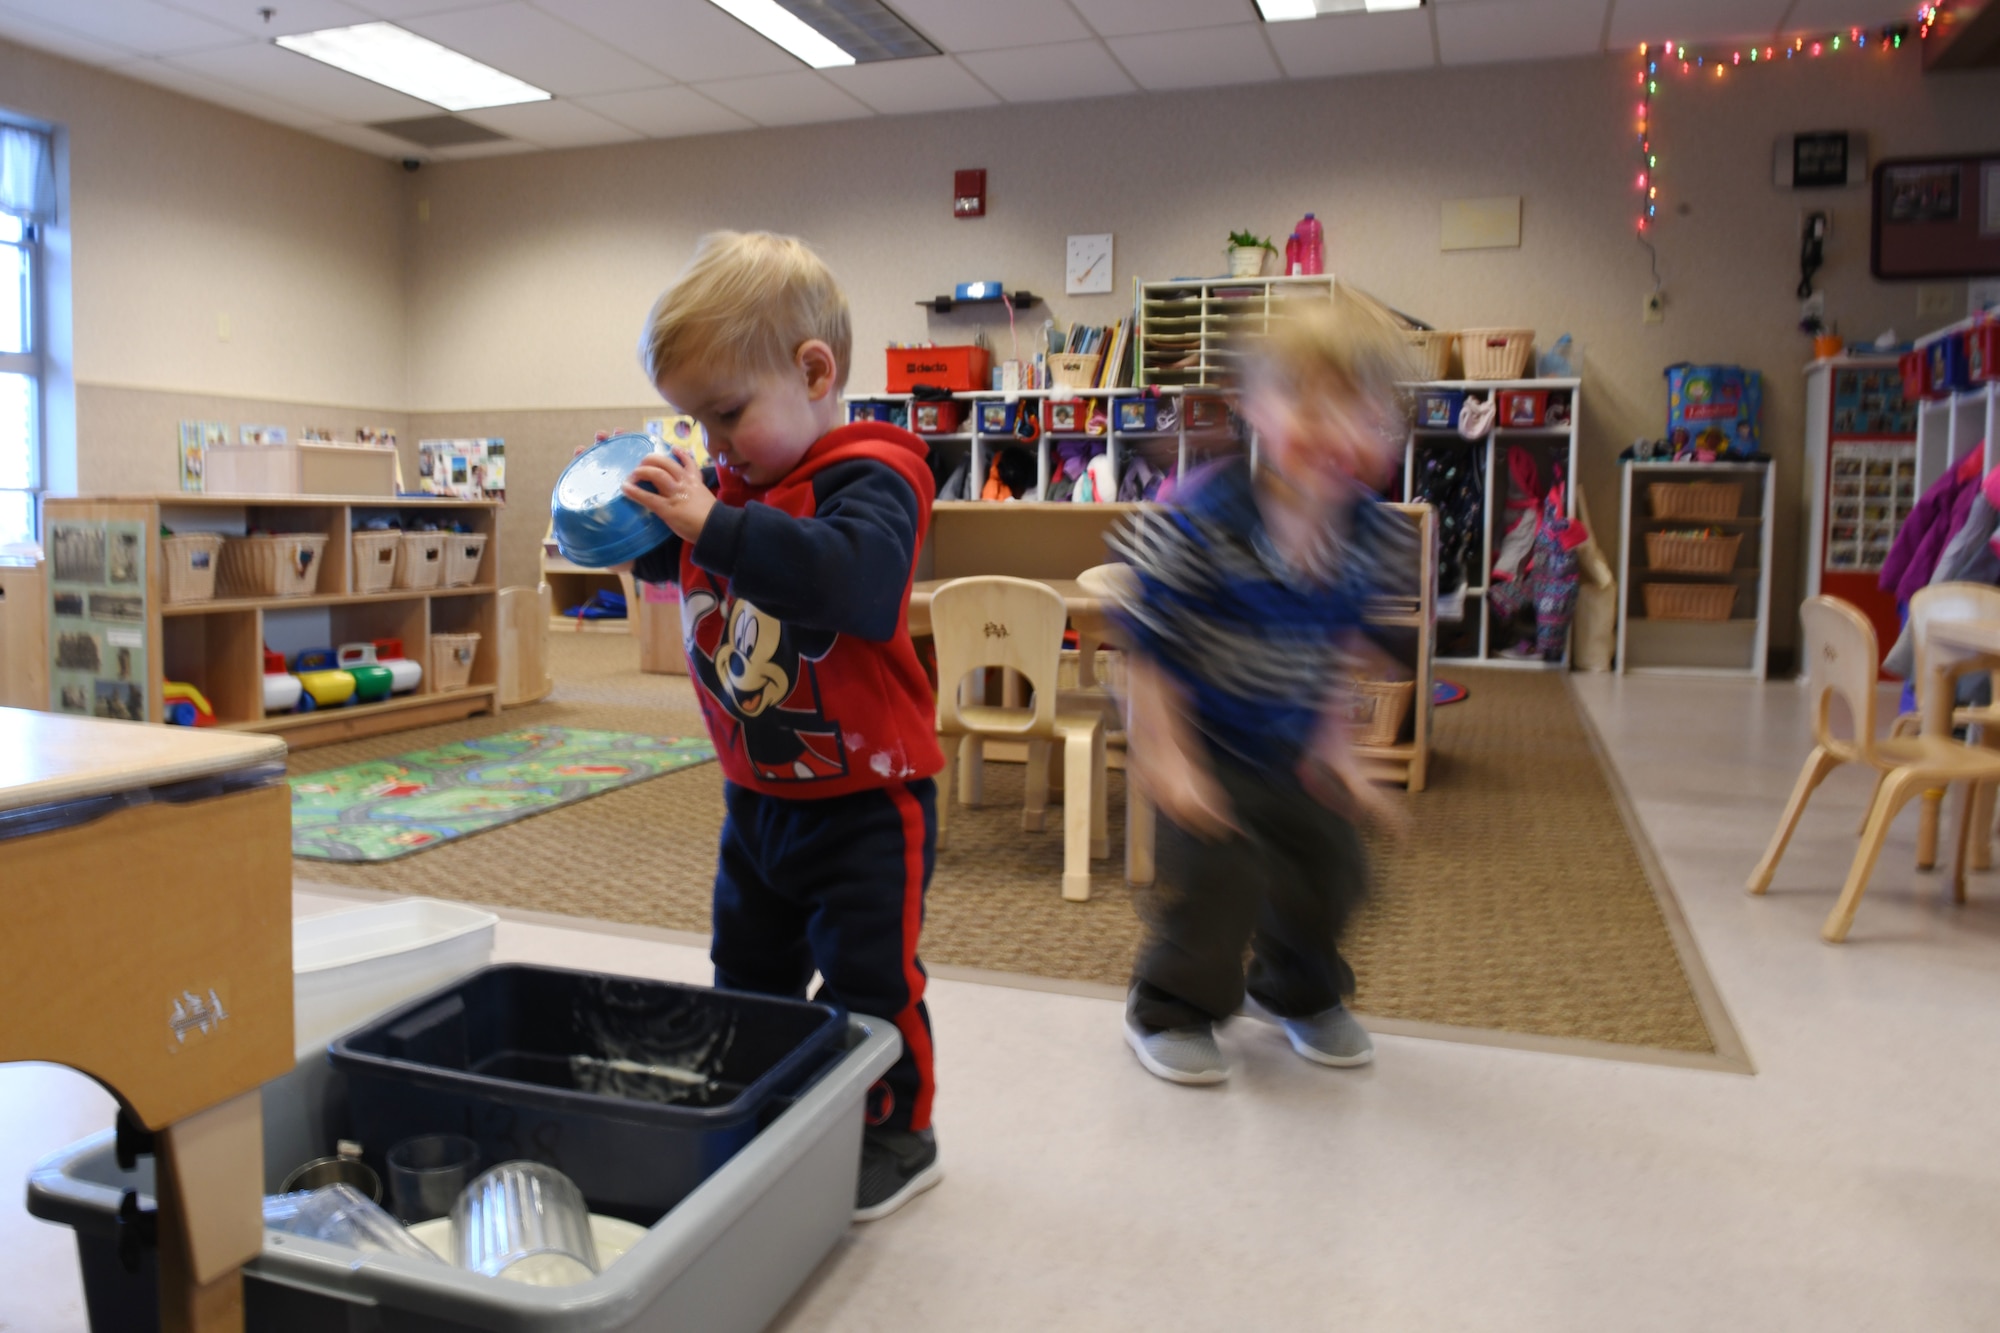 Jackson Scott, the son of Staff Sgt. Matthew Scott a 372nd Training Squadron professional military education instructor, cleans his bowl after snack time at the McRaven Child Development Center on Ellsworth Air Force Base, S.D., Dec. 6, 2018. The afternoon is not just fun and games; the toddlers are taught to wash their hands and clean up their play spaces. (U.S. Air Force Photo by Airman 1st Class Christina Bennett)